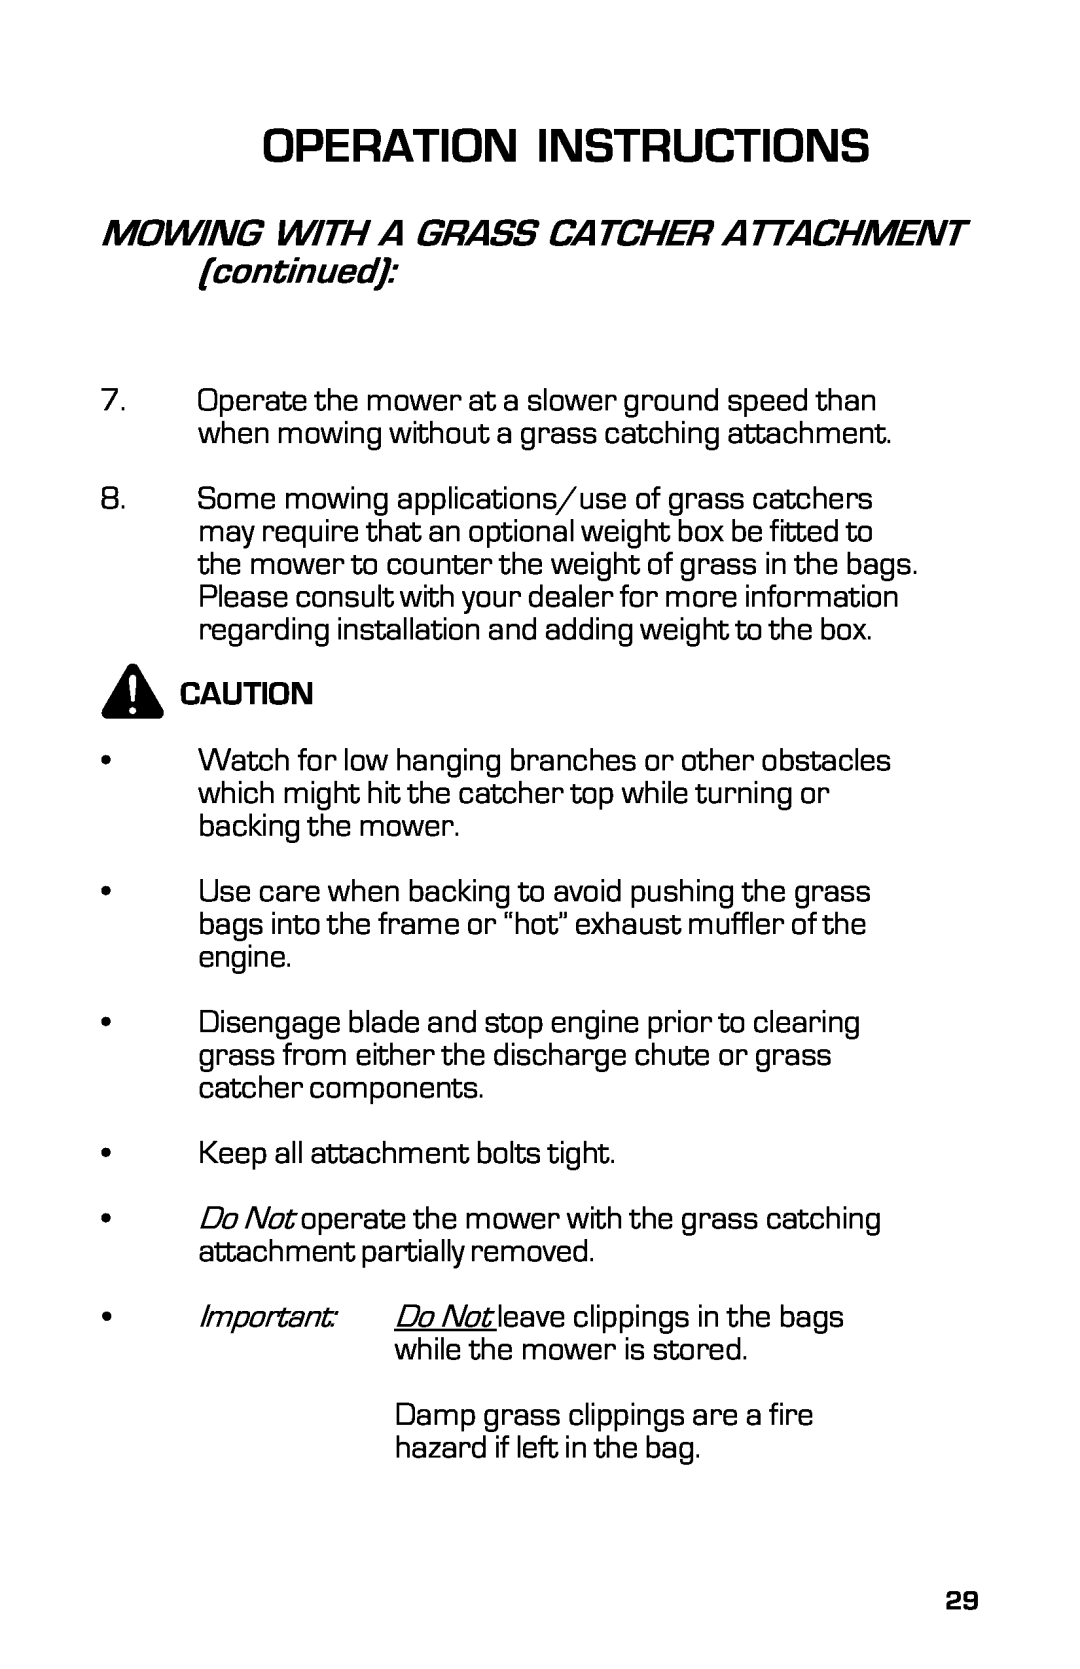 Dixon 13631-0702, ZTR 3363 manual Operation Instructions, MOWING WITH A GRASS CATCHER ATTACHMENT continued 